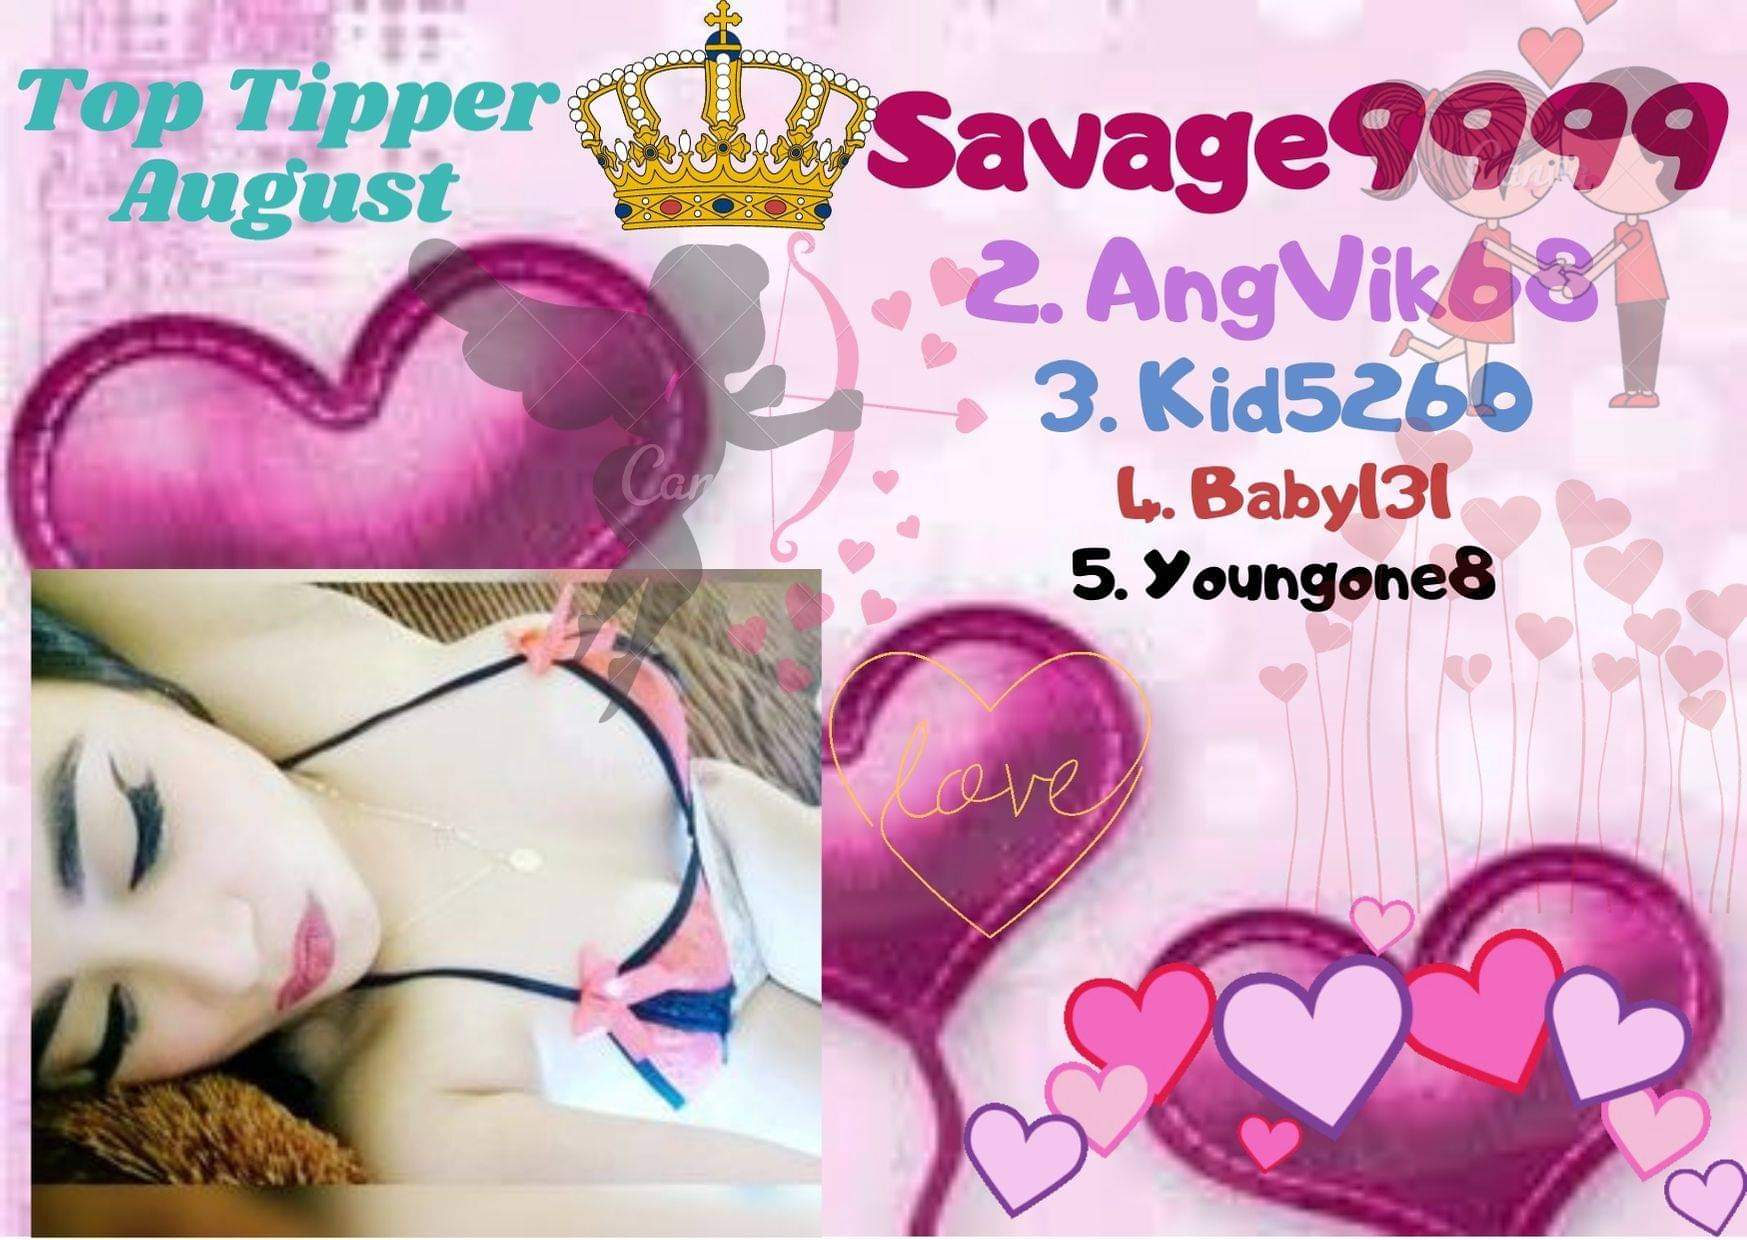 princesakelly NEW  TOP   TIPPERS AUGUST image: 1